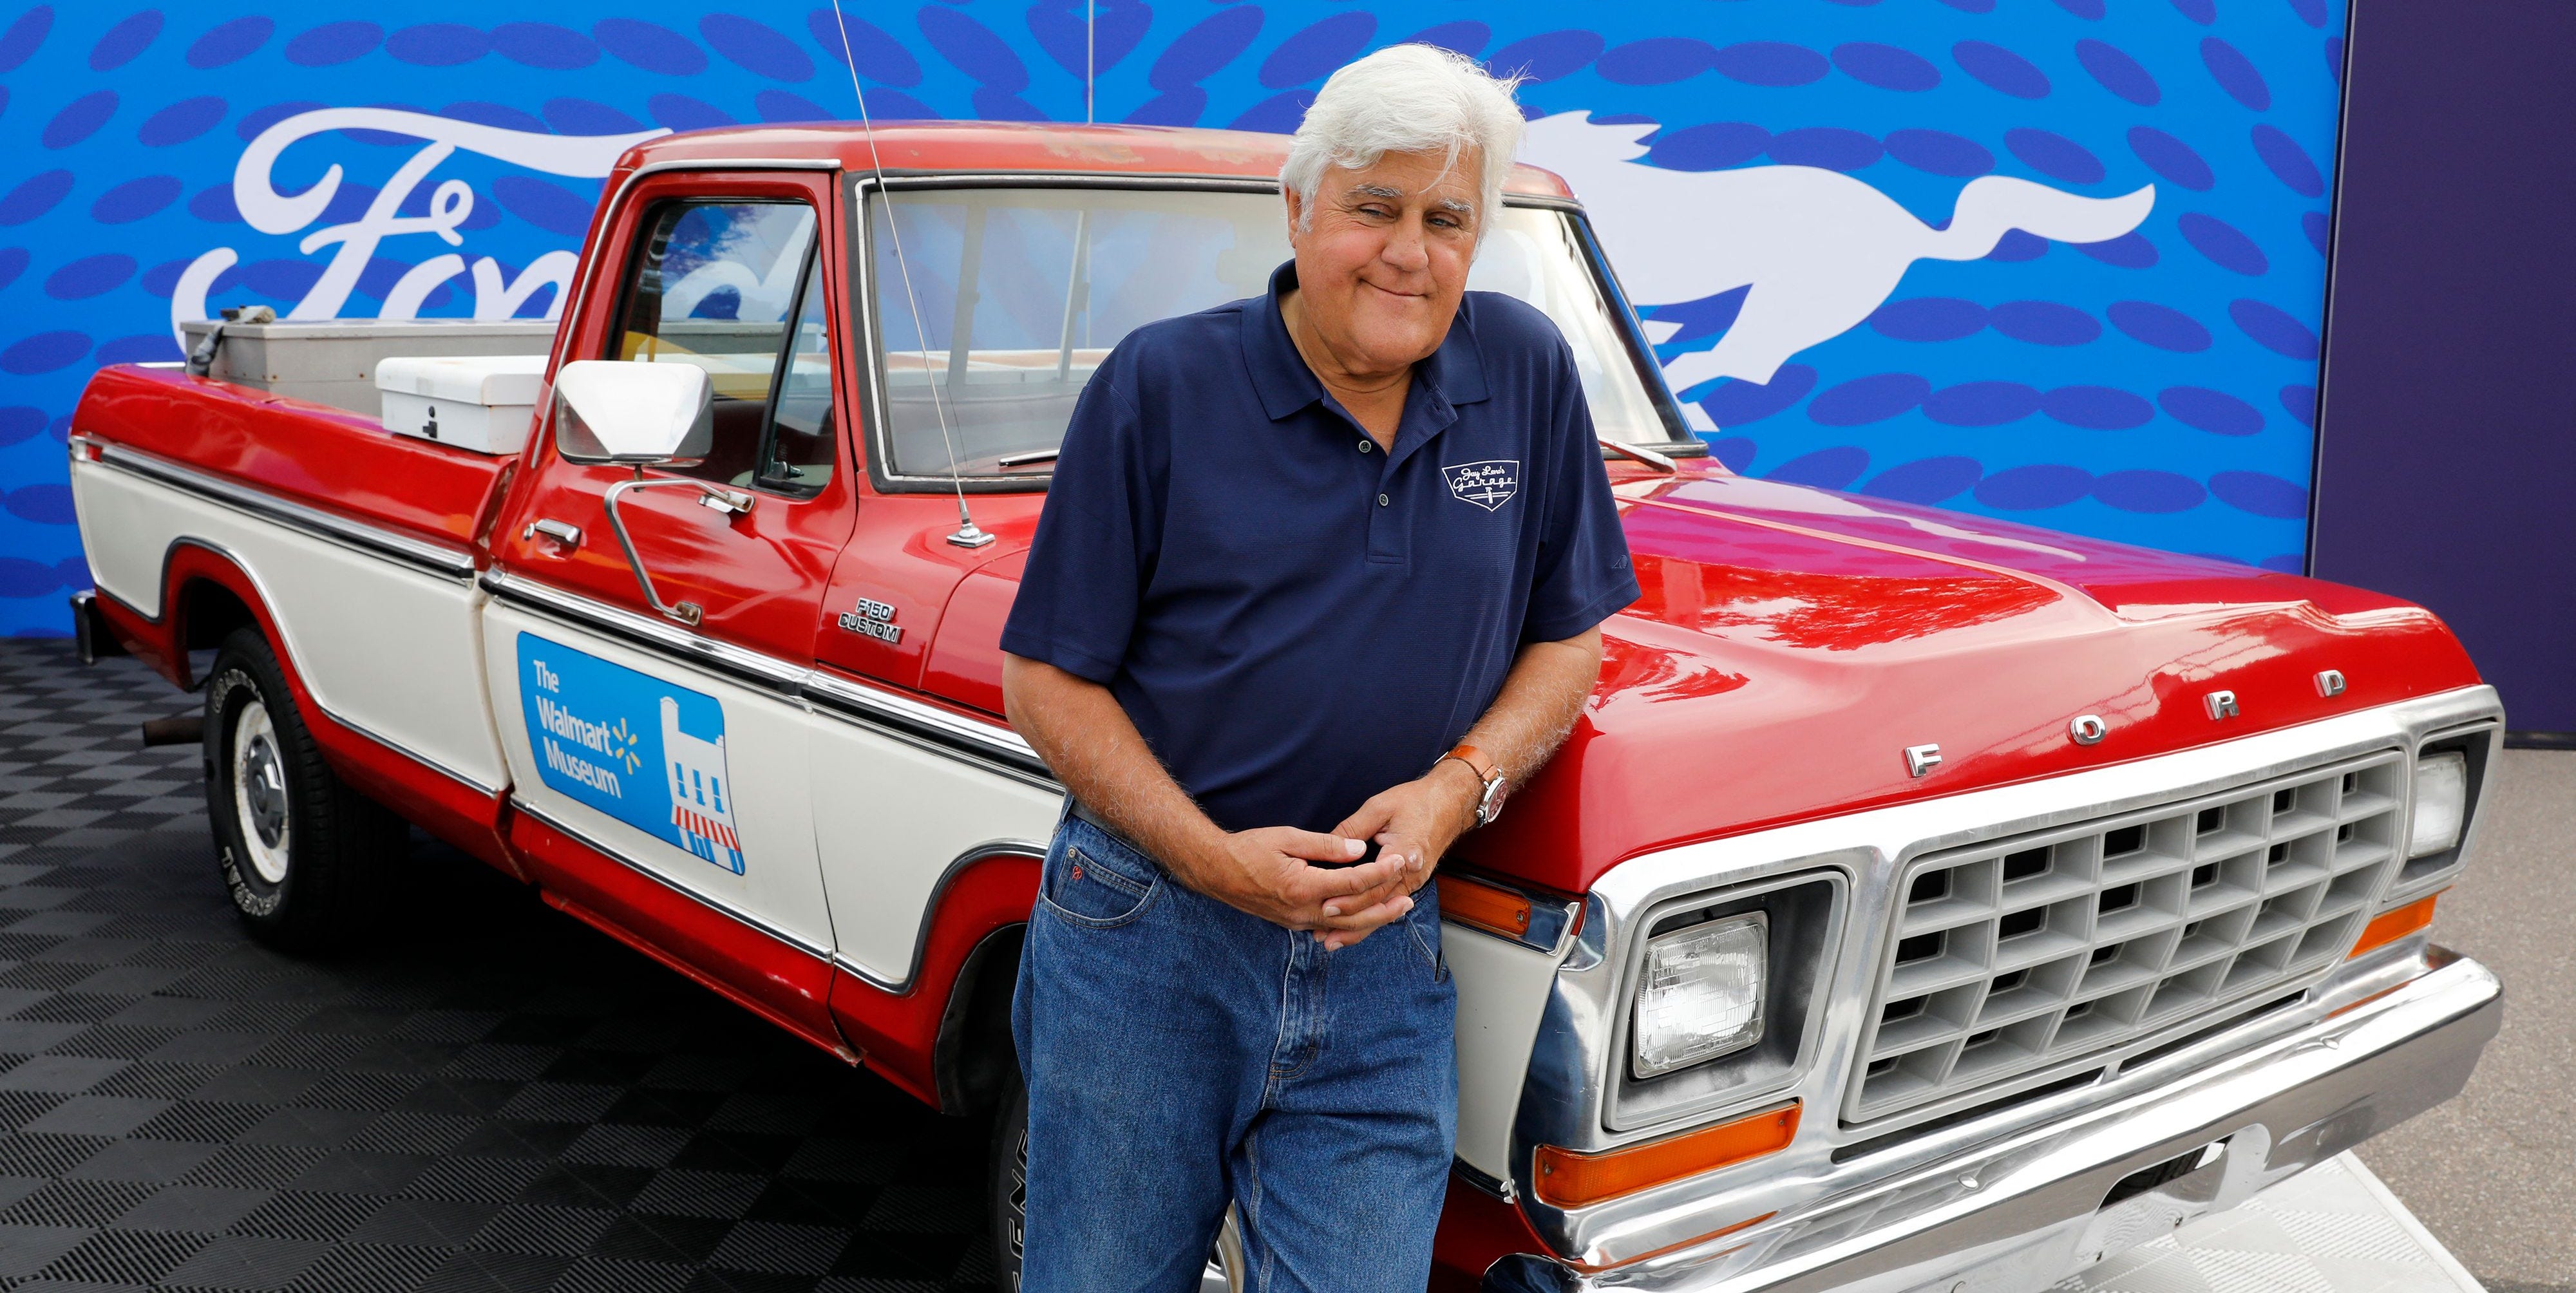 Jay Leno 'in Good Humor' After Suffering Severe Burns in Gas Fire